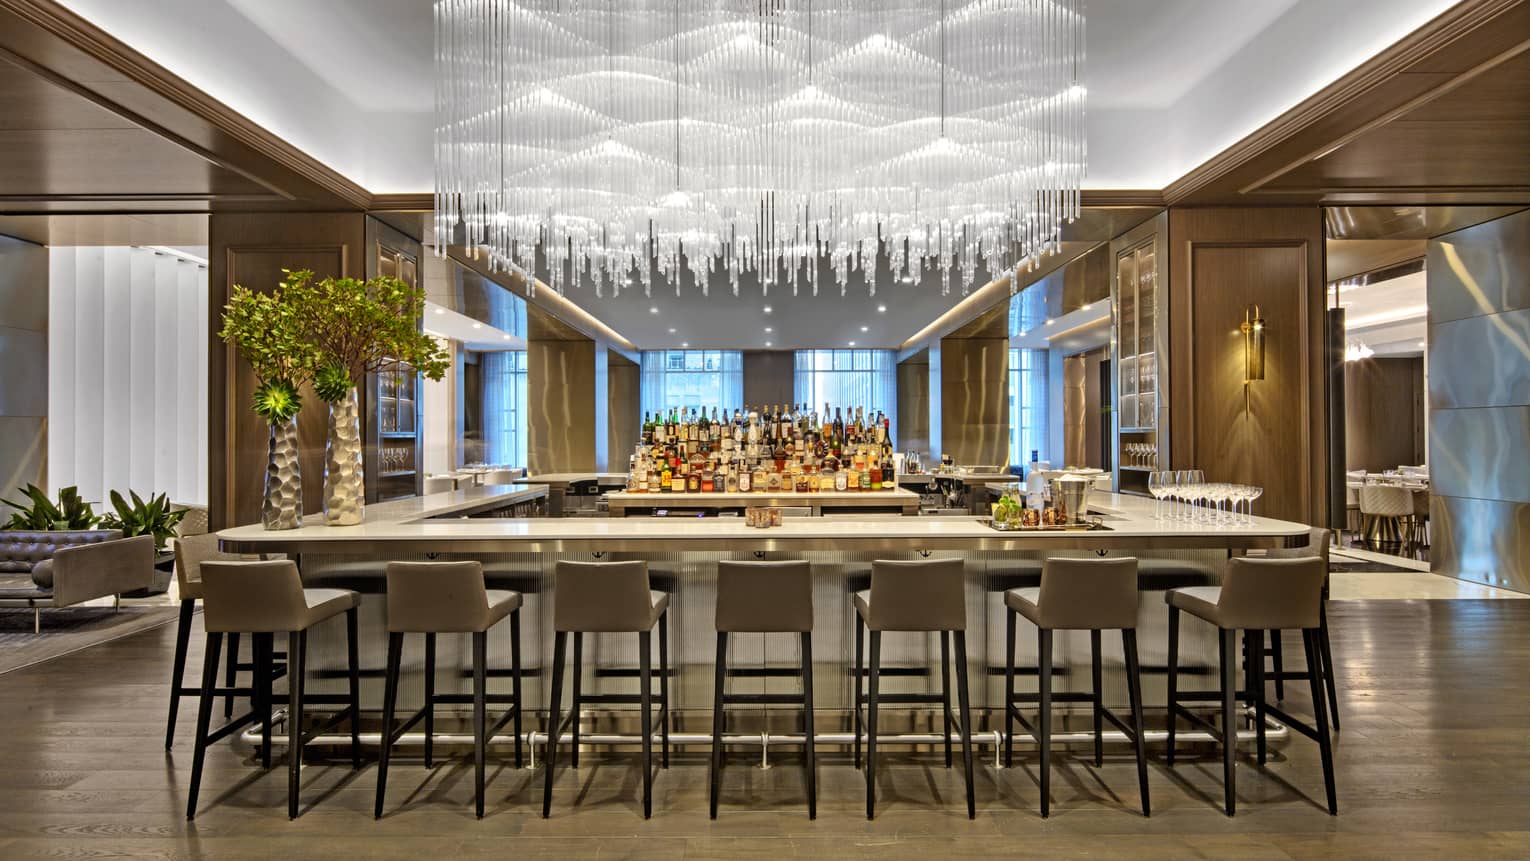 A large bar area with hanging glass chandelier and many grey stools.